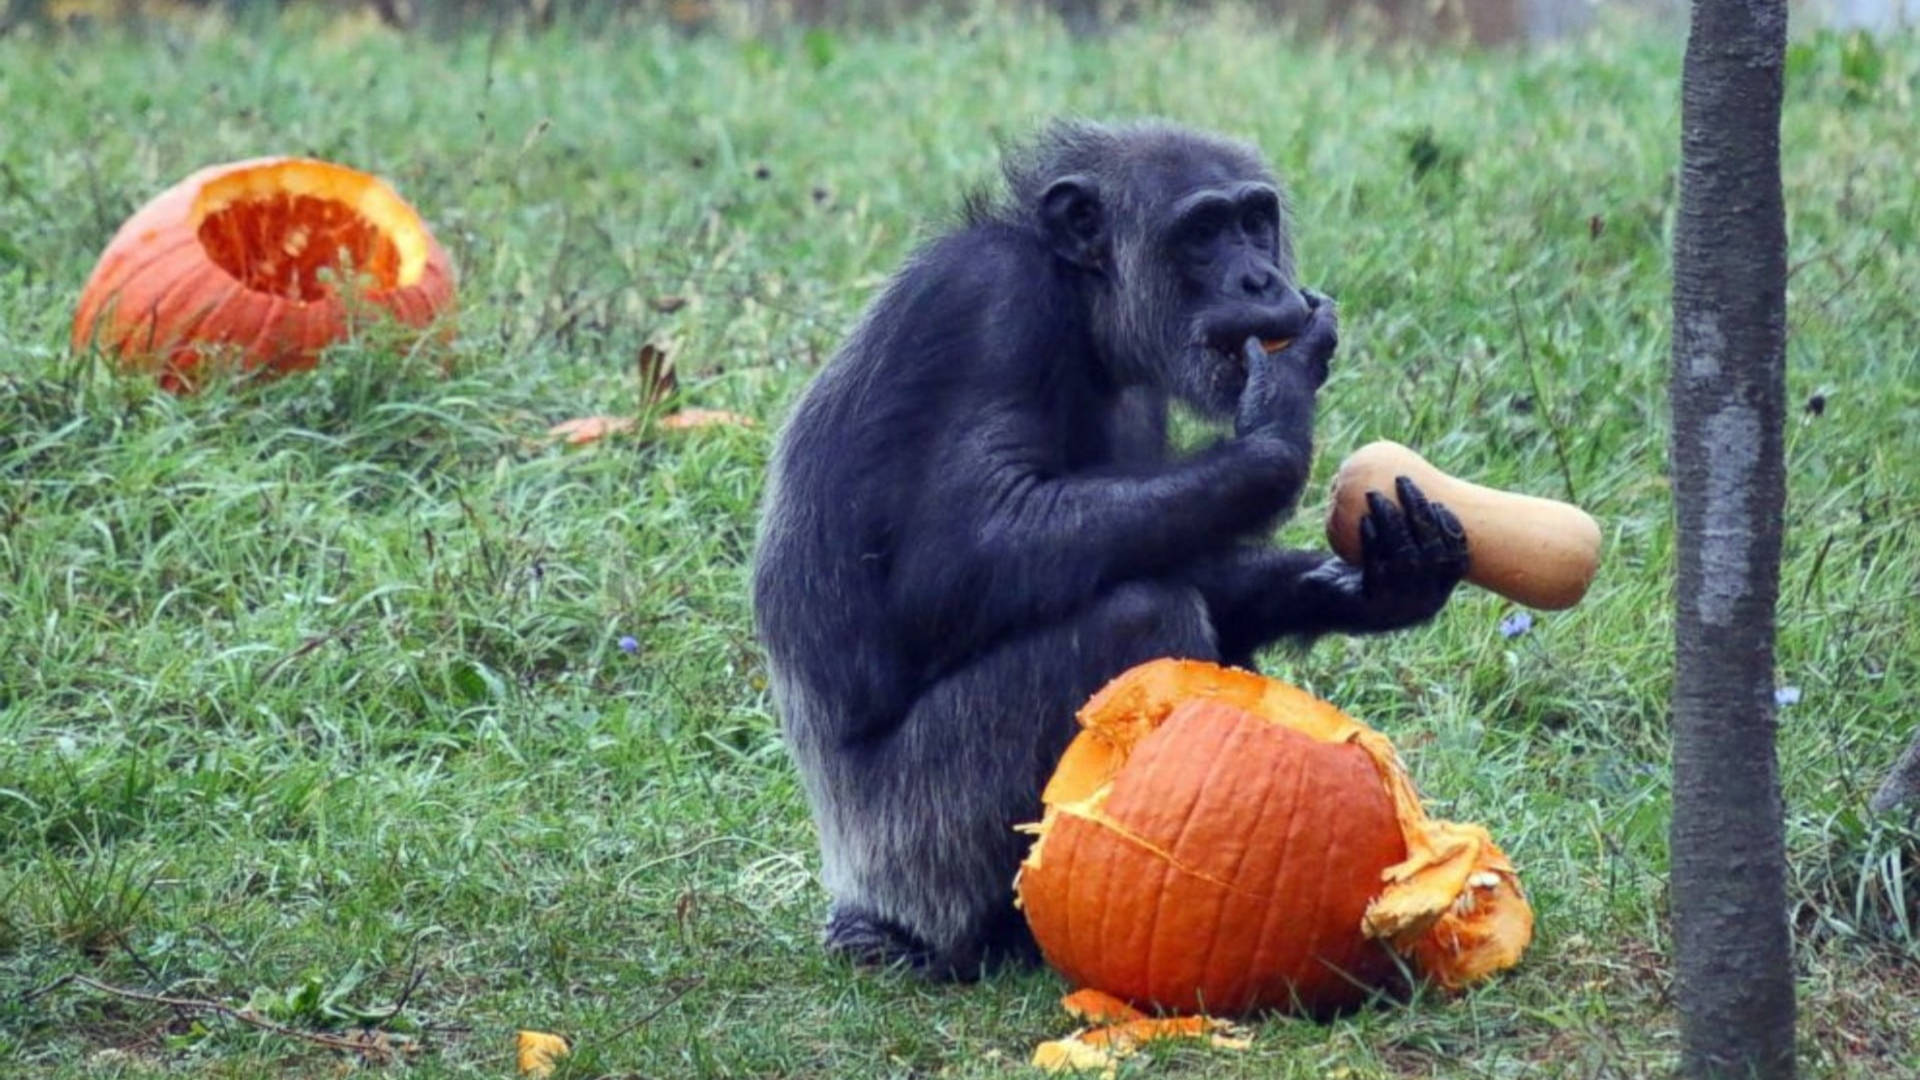 Chimpanzee With Pumpkins In Zoo Background